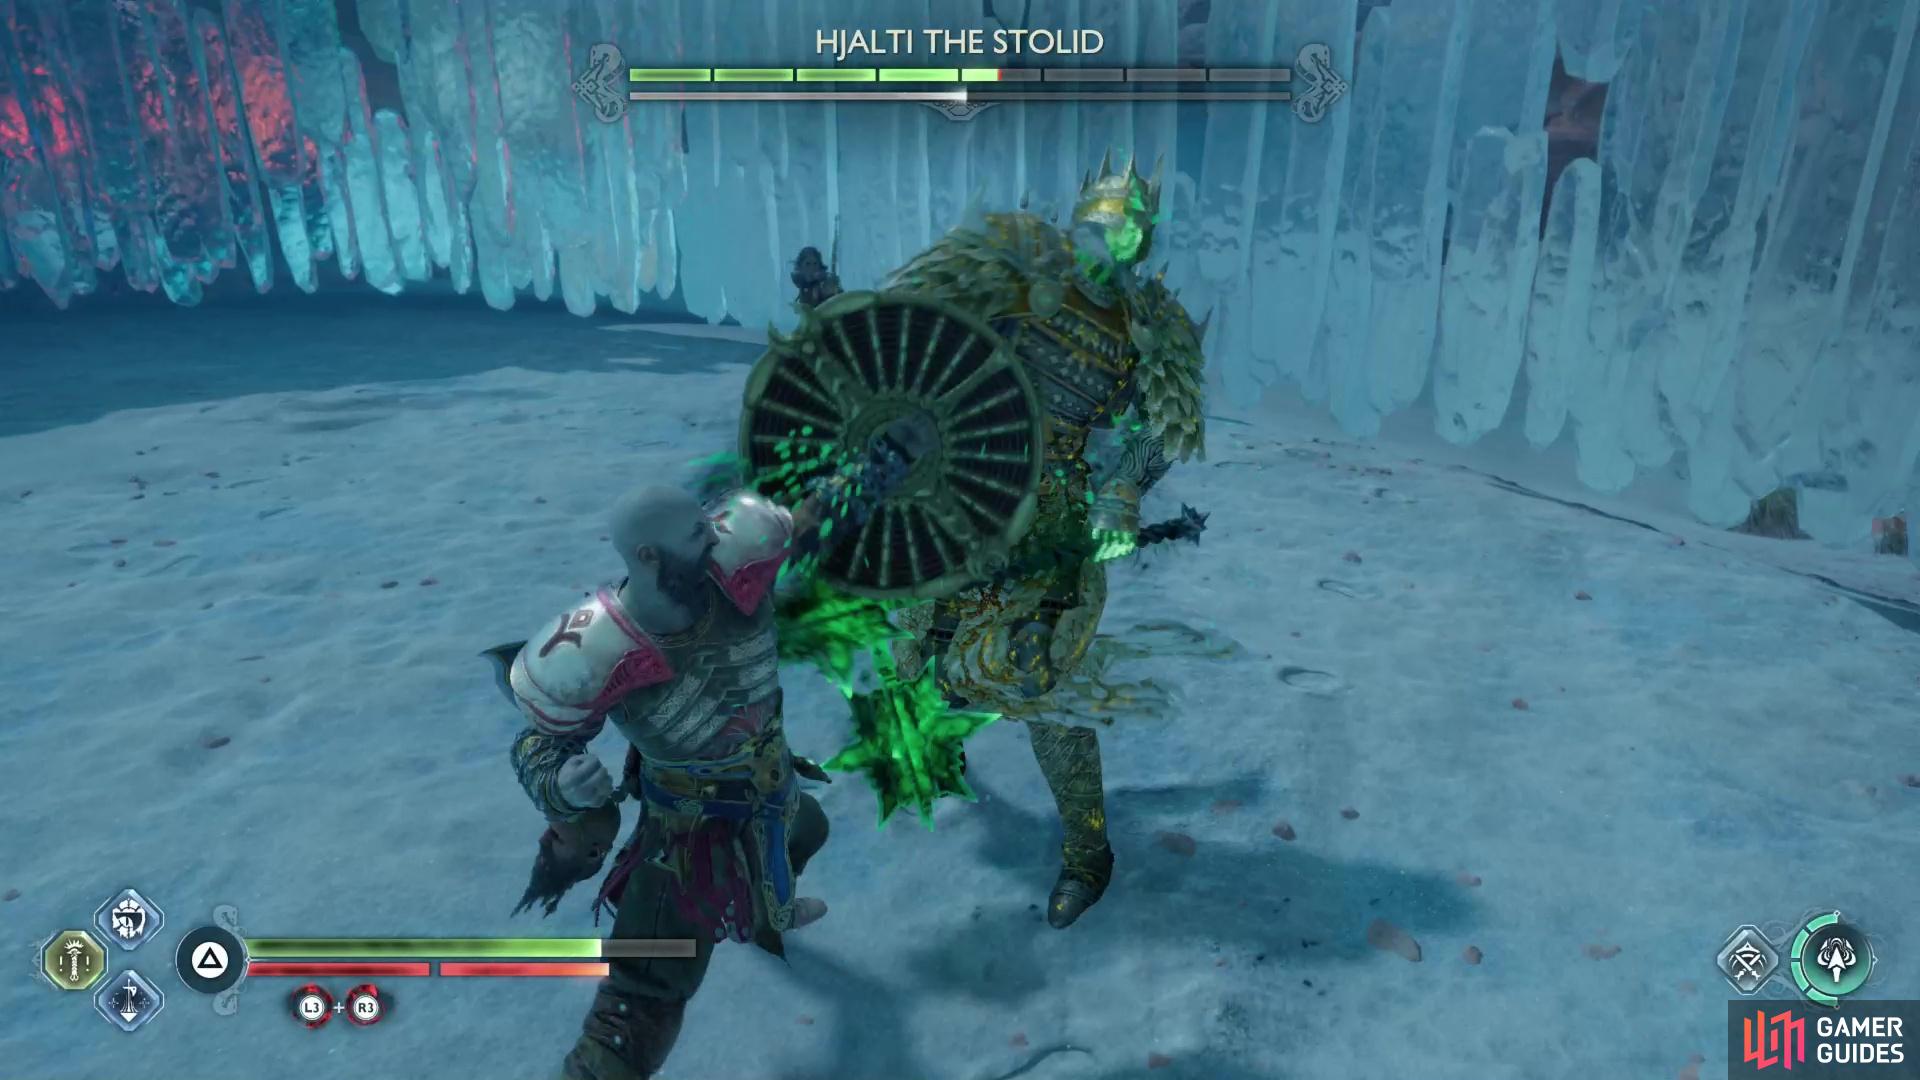 Be prepared to dodge or shield bash when this Berserker jumps away, and parry and punish whenever he comes in close.